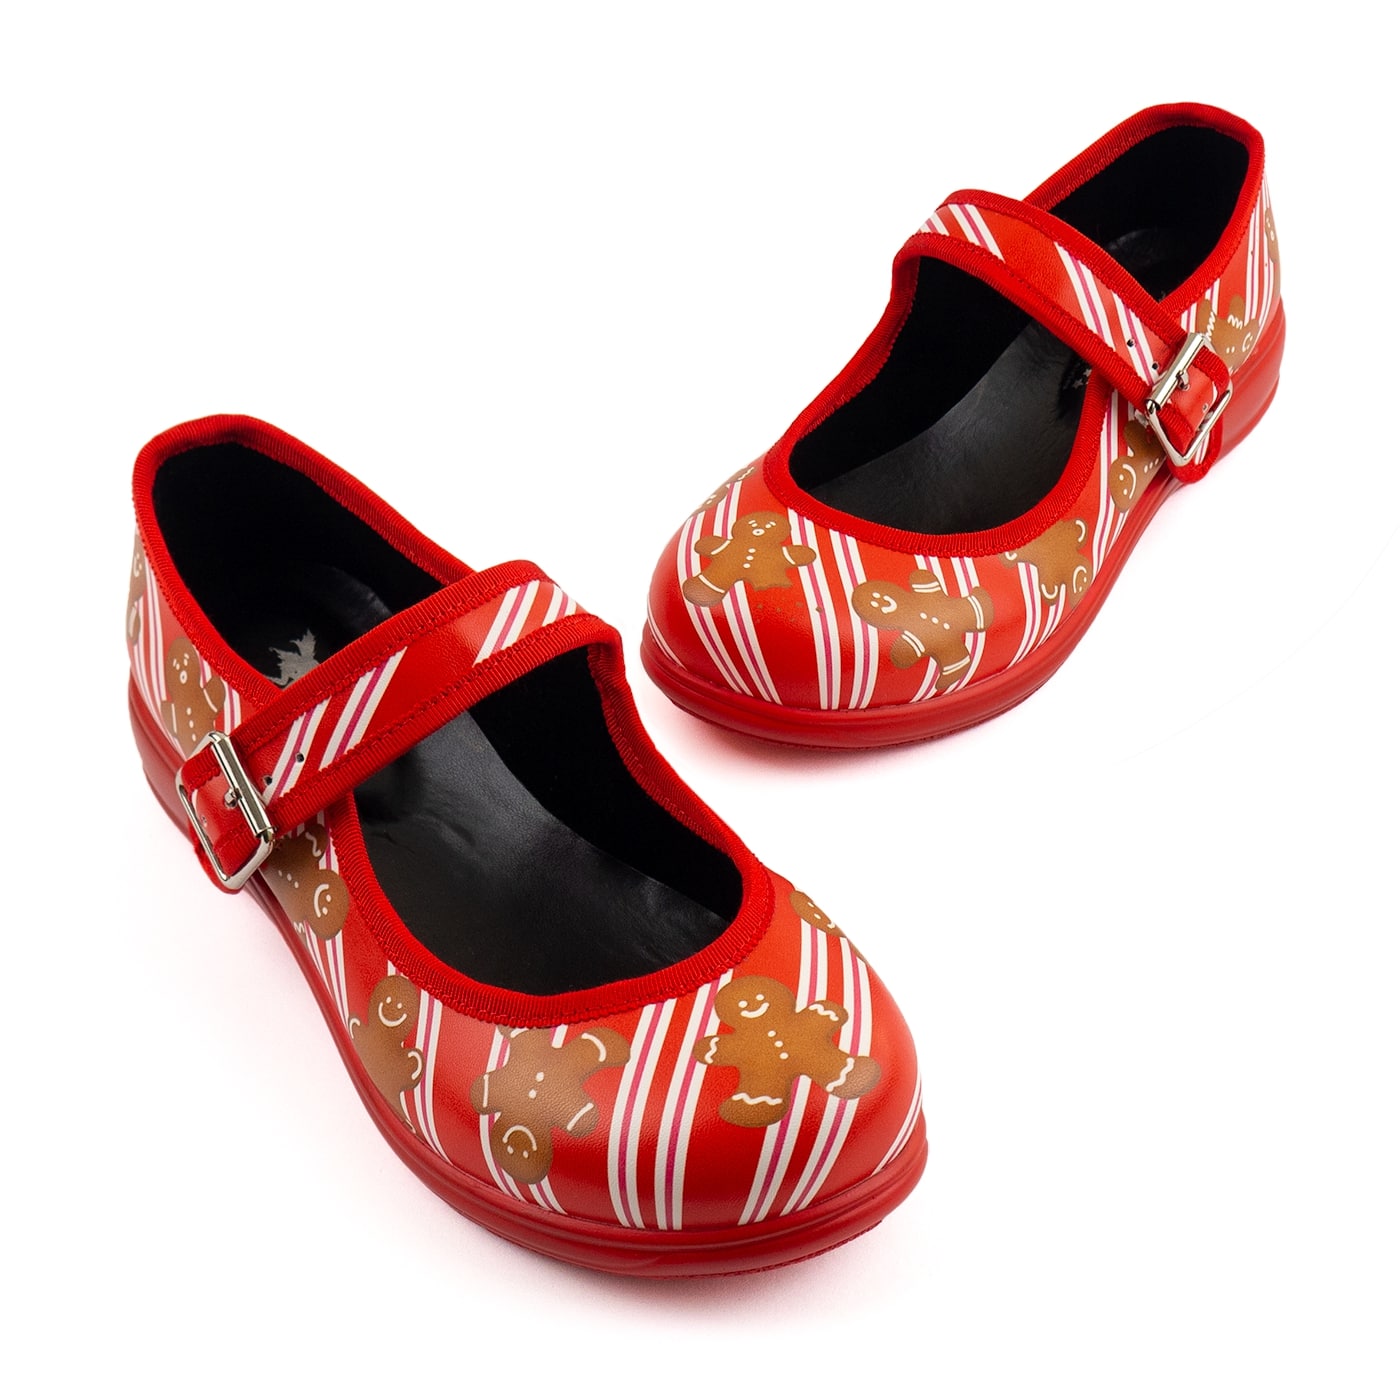 For Santa Mary Janes by RainbowsAndFairies.com.au (Christmas Shoes - Gingerbread - Mismatched Shoes - Cute & Comfy - Buckle Up Shoes) - SKU: FW_MARYJ_SANTA_ORG - Pic-01